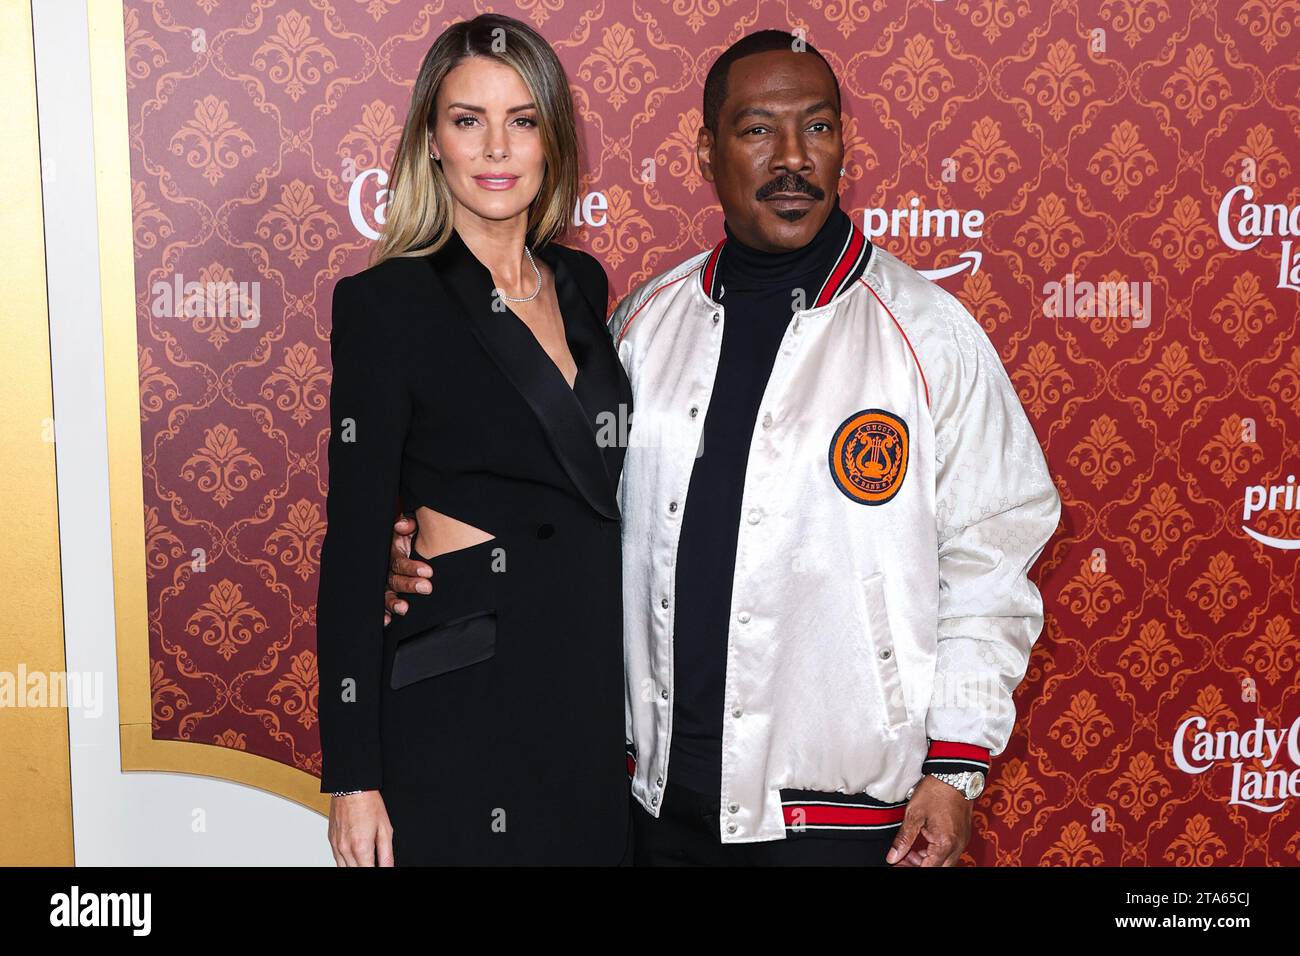 Westwood, United States. 28th Nov, 2023. WESTWOOD, LOS ANGELES, CALIFORNIA, USA - NOVEMBER 28: Australian actress Paige Butcher and fiancé/American actor and comedian Eddie Murphy arrive at the World Premiere Of Amazon Prime Video's 'Candy Cane Lane' held at the Regency Village Theatre on November 28, 2023 in Westwood, Los Angeles, California, United States. (Photo by Xavier Collin/Image Press Agency) Credit: Image Press Agency/Alamy Live News Stock Photo